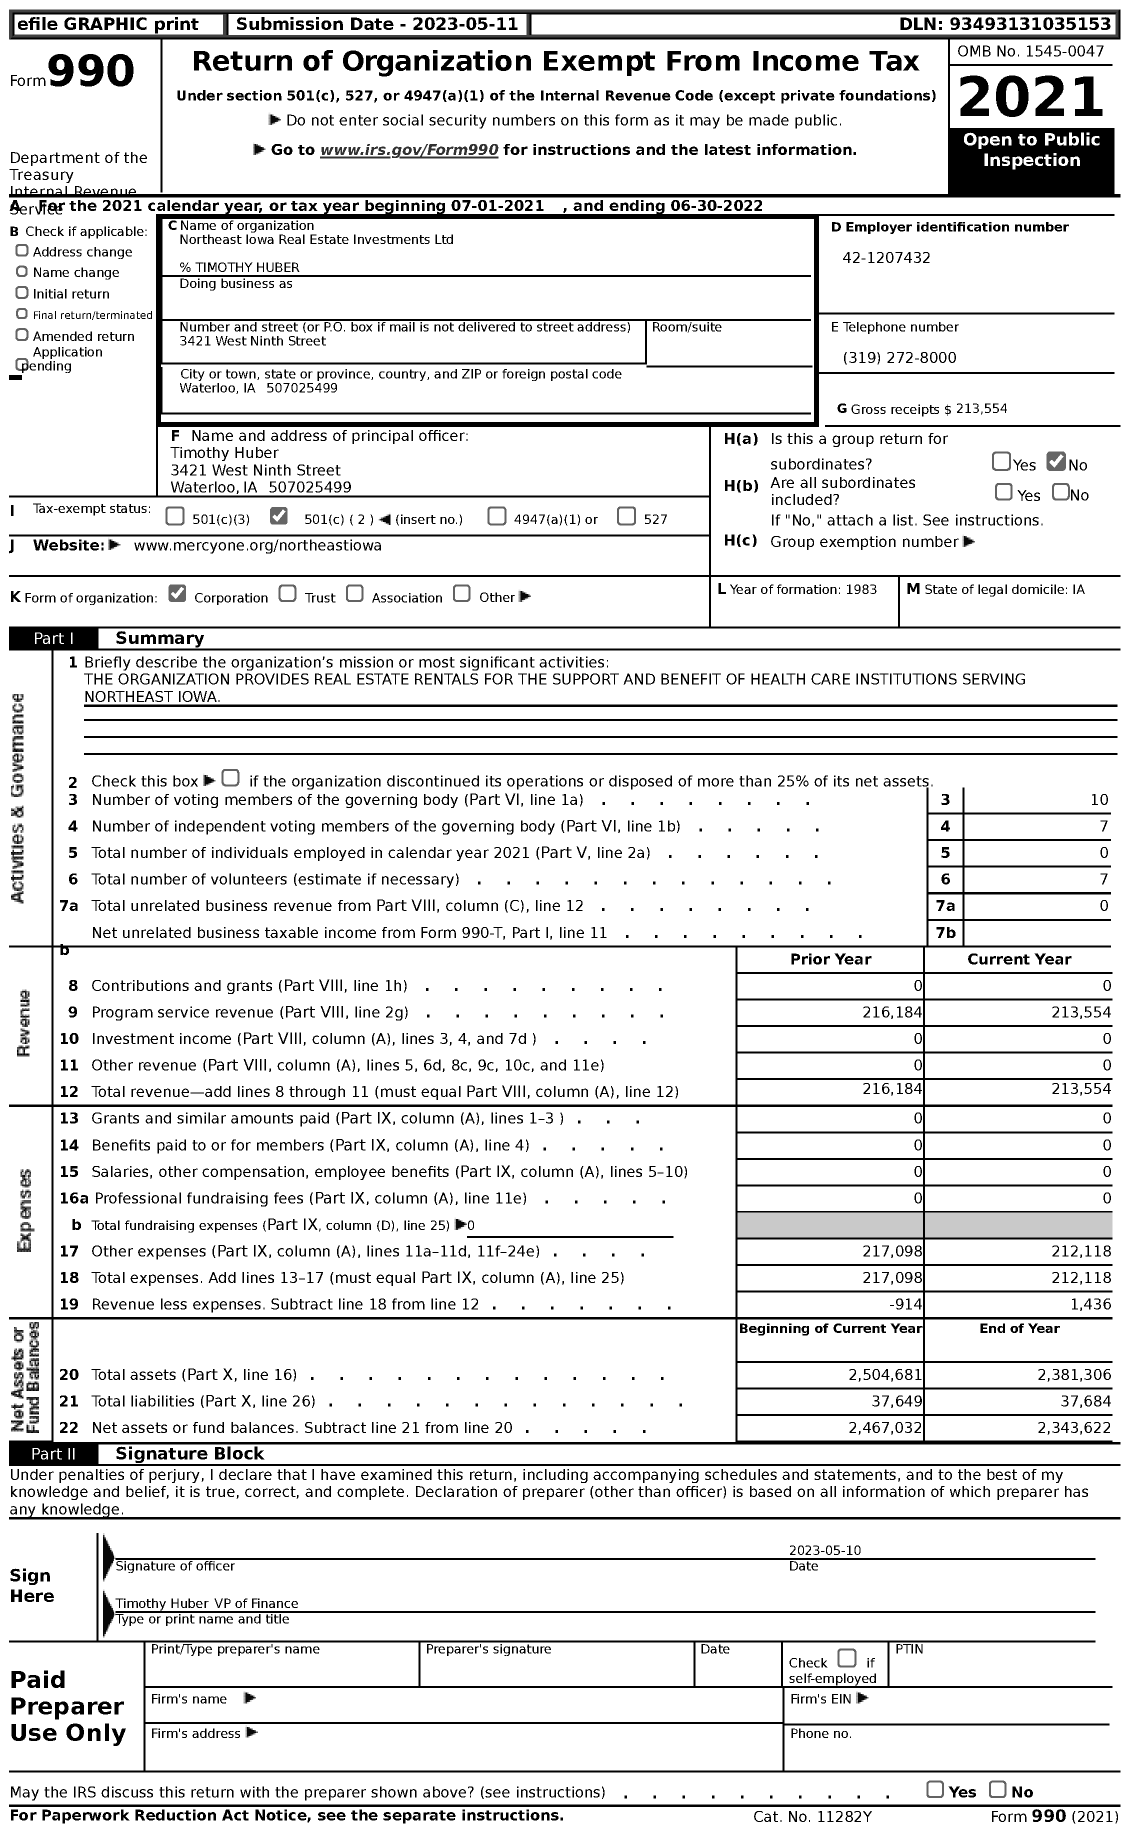 Image of first page of 2021 Form 990 for Northeast Iowa Real Estate Investments